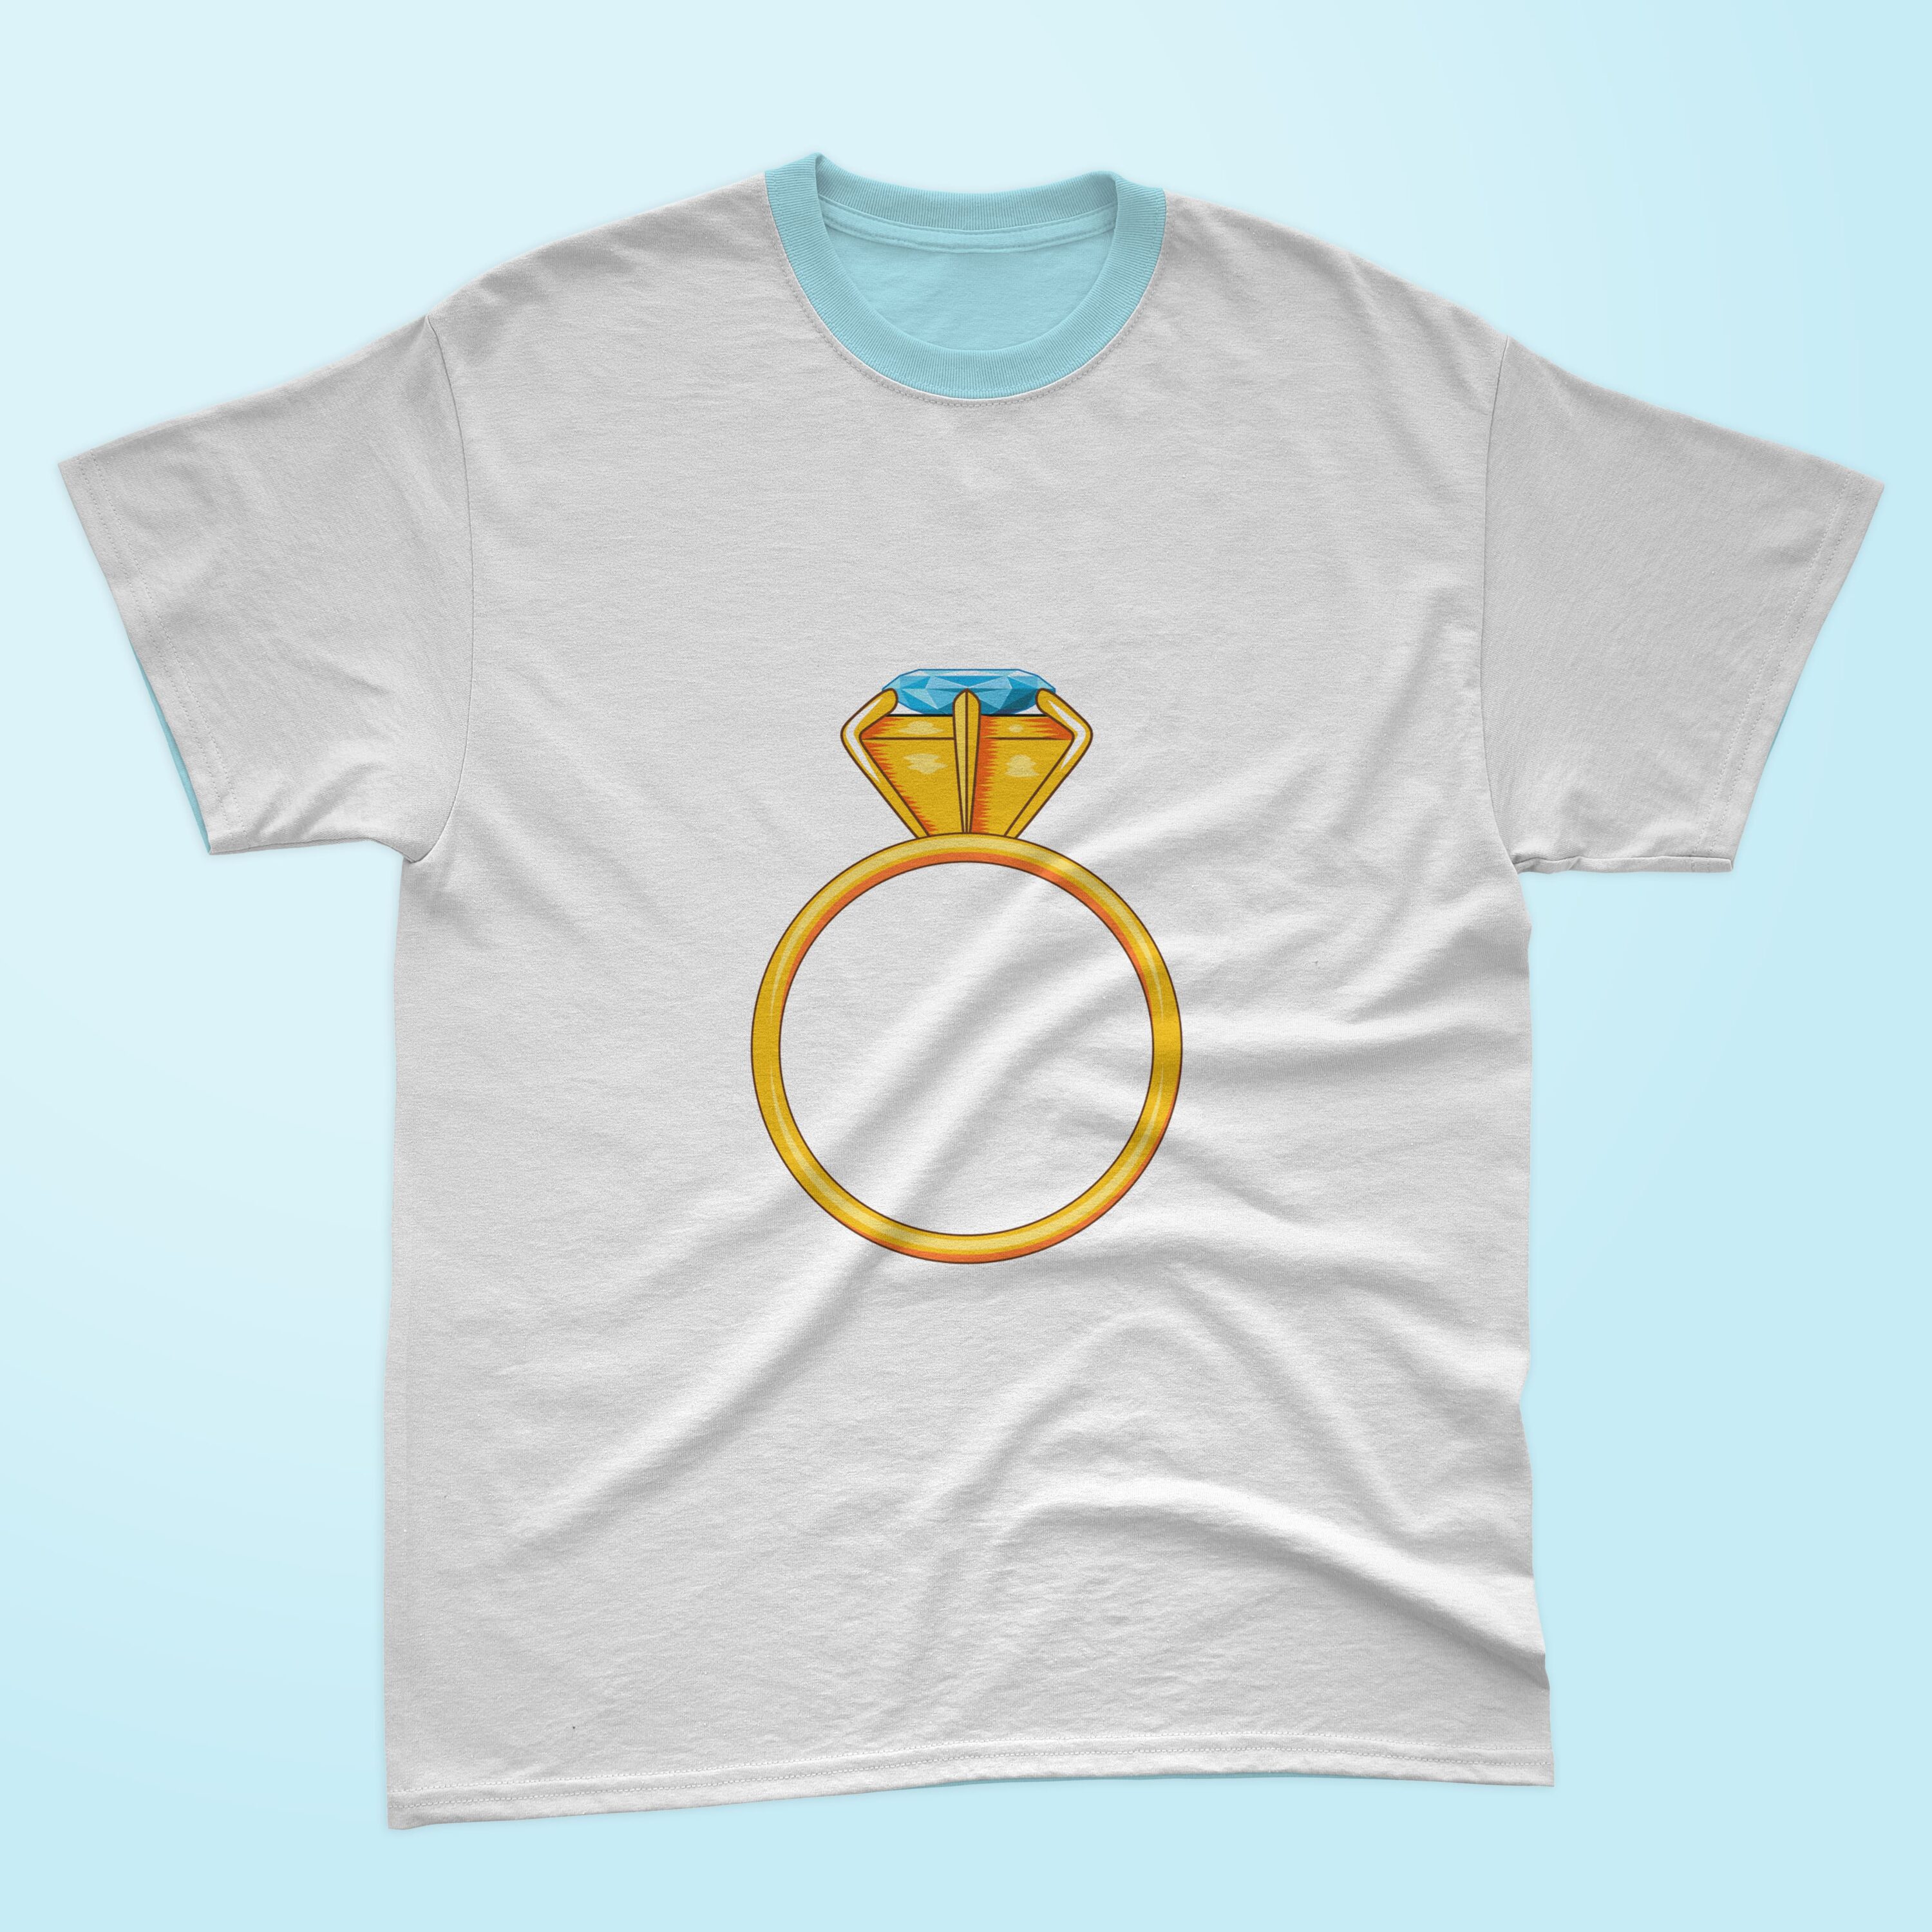 Image of white t-shirt with exquisite ring print.